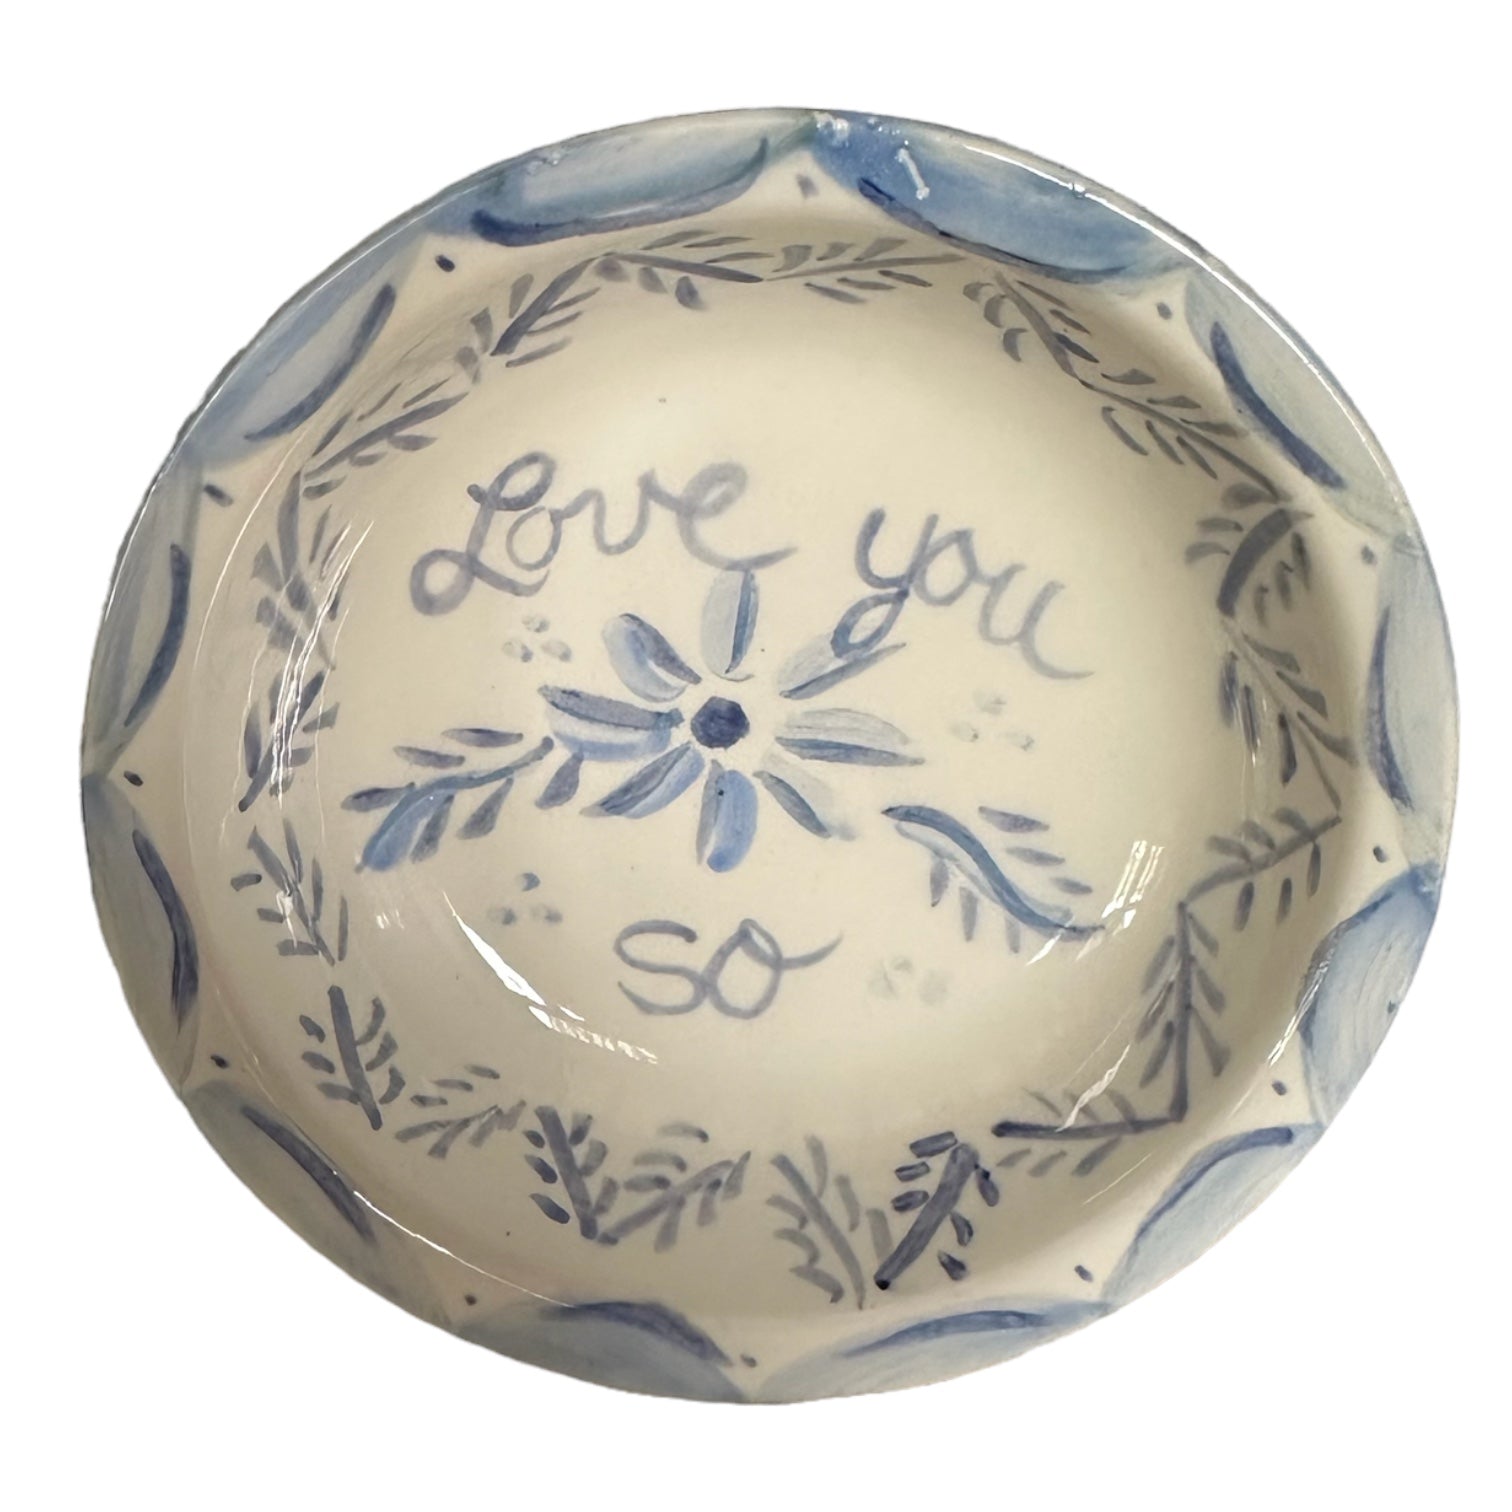 Small Personalized Bowl - Premium plate from Tricia Lowenfield Design 